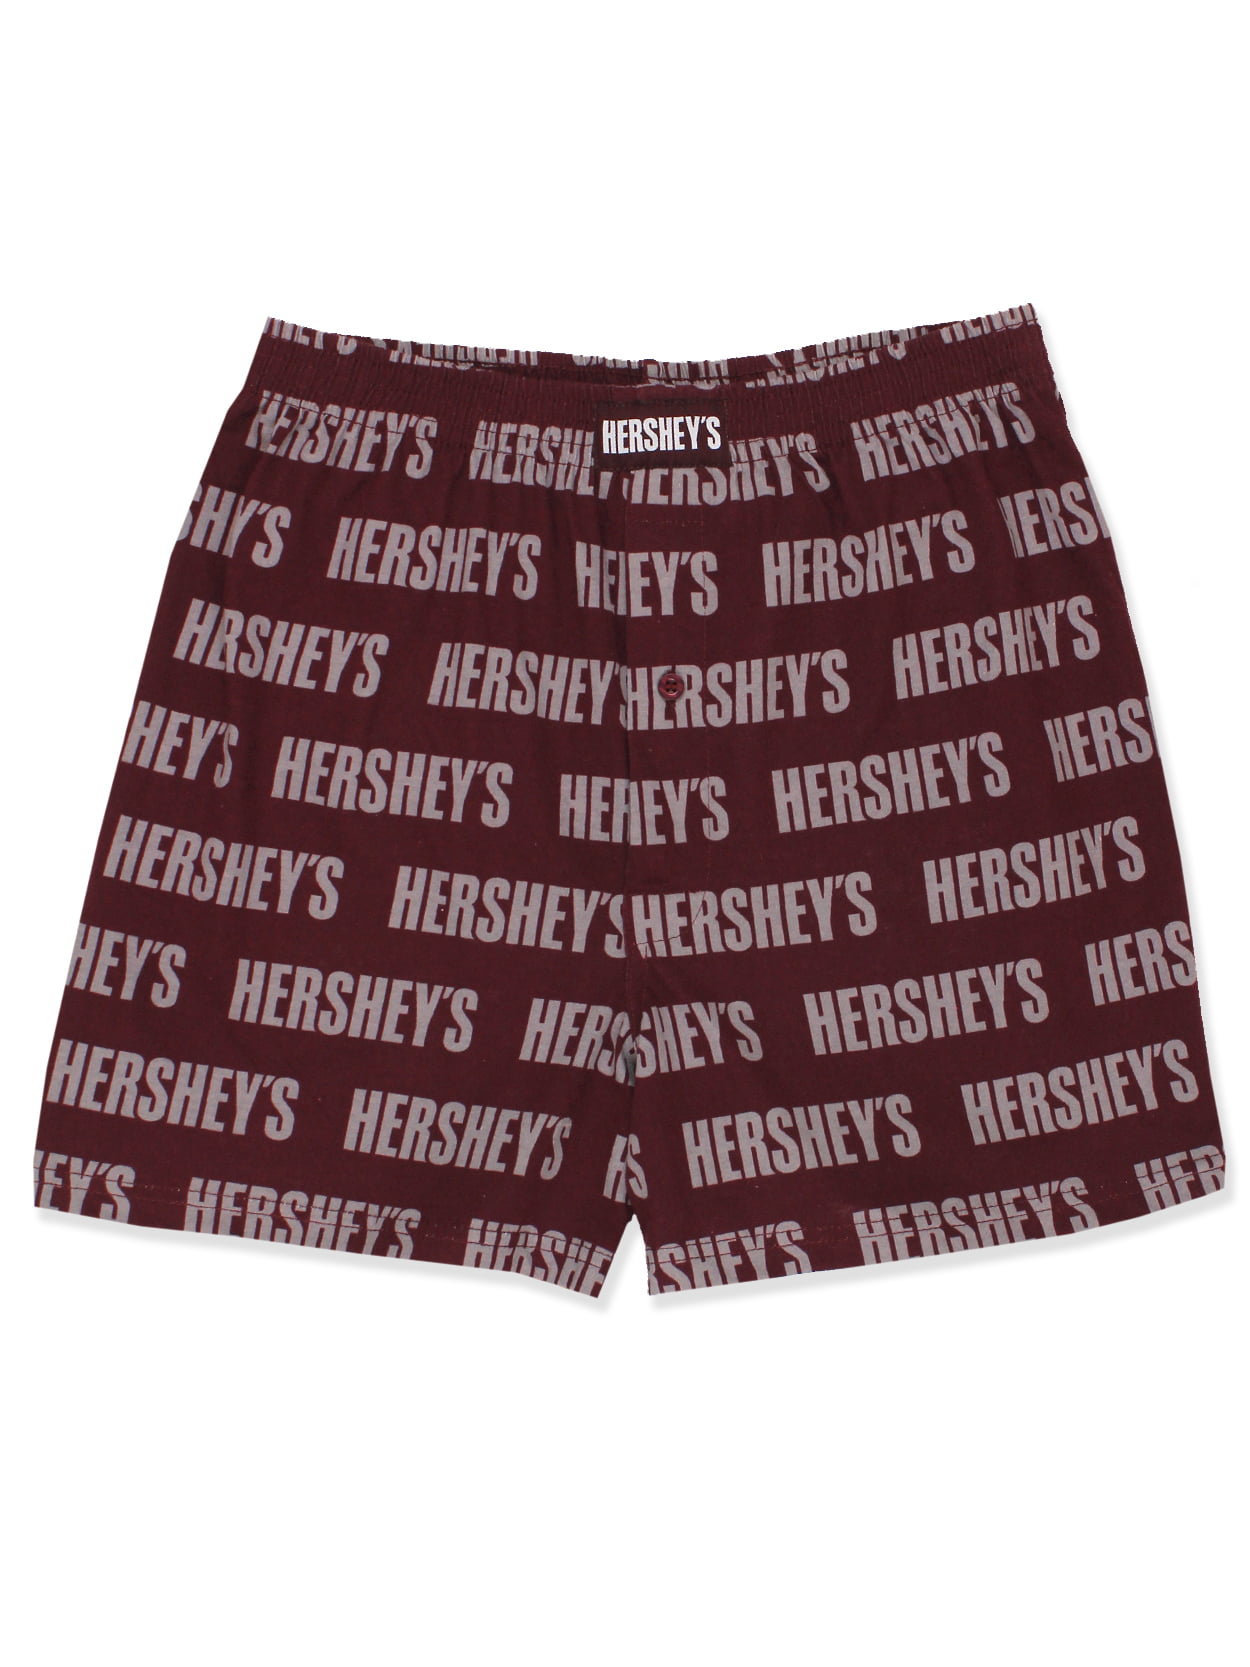 HERSHEY'S Chocolate Bar Reese's Peanut Butter Cup Mens Boxer Lounge Shorts 